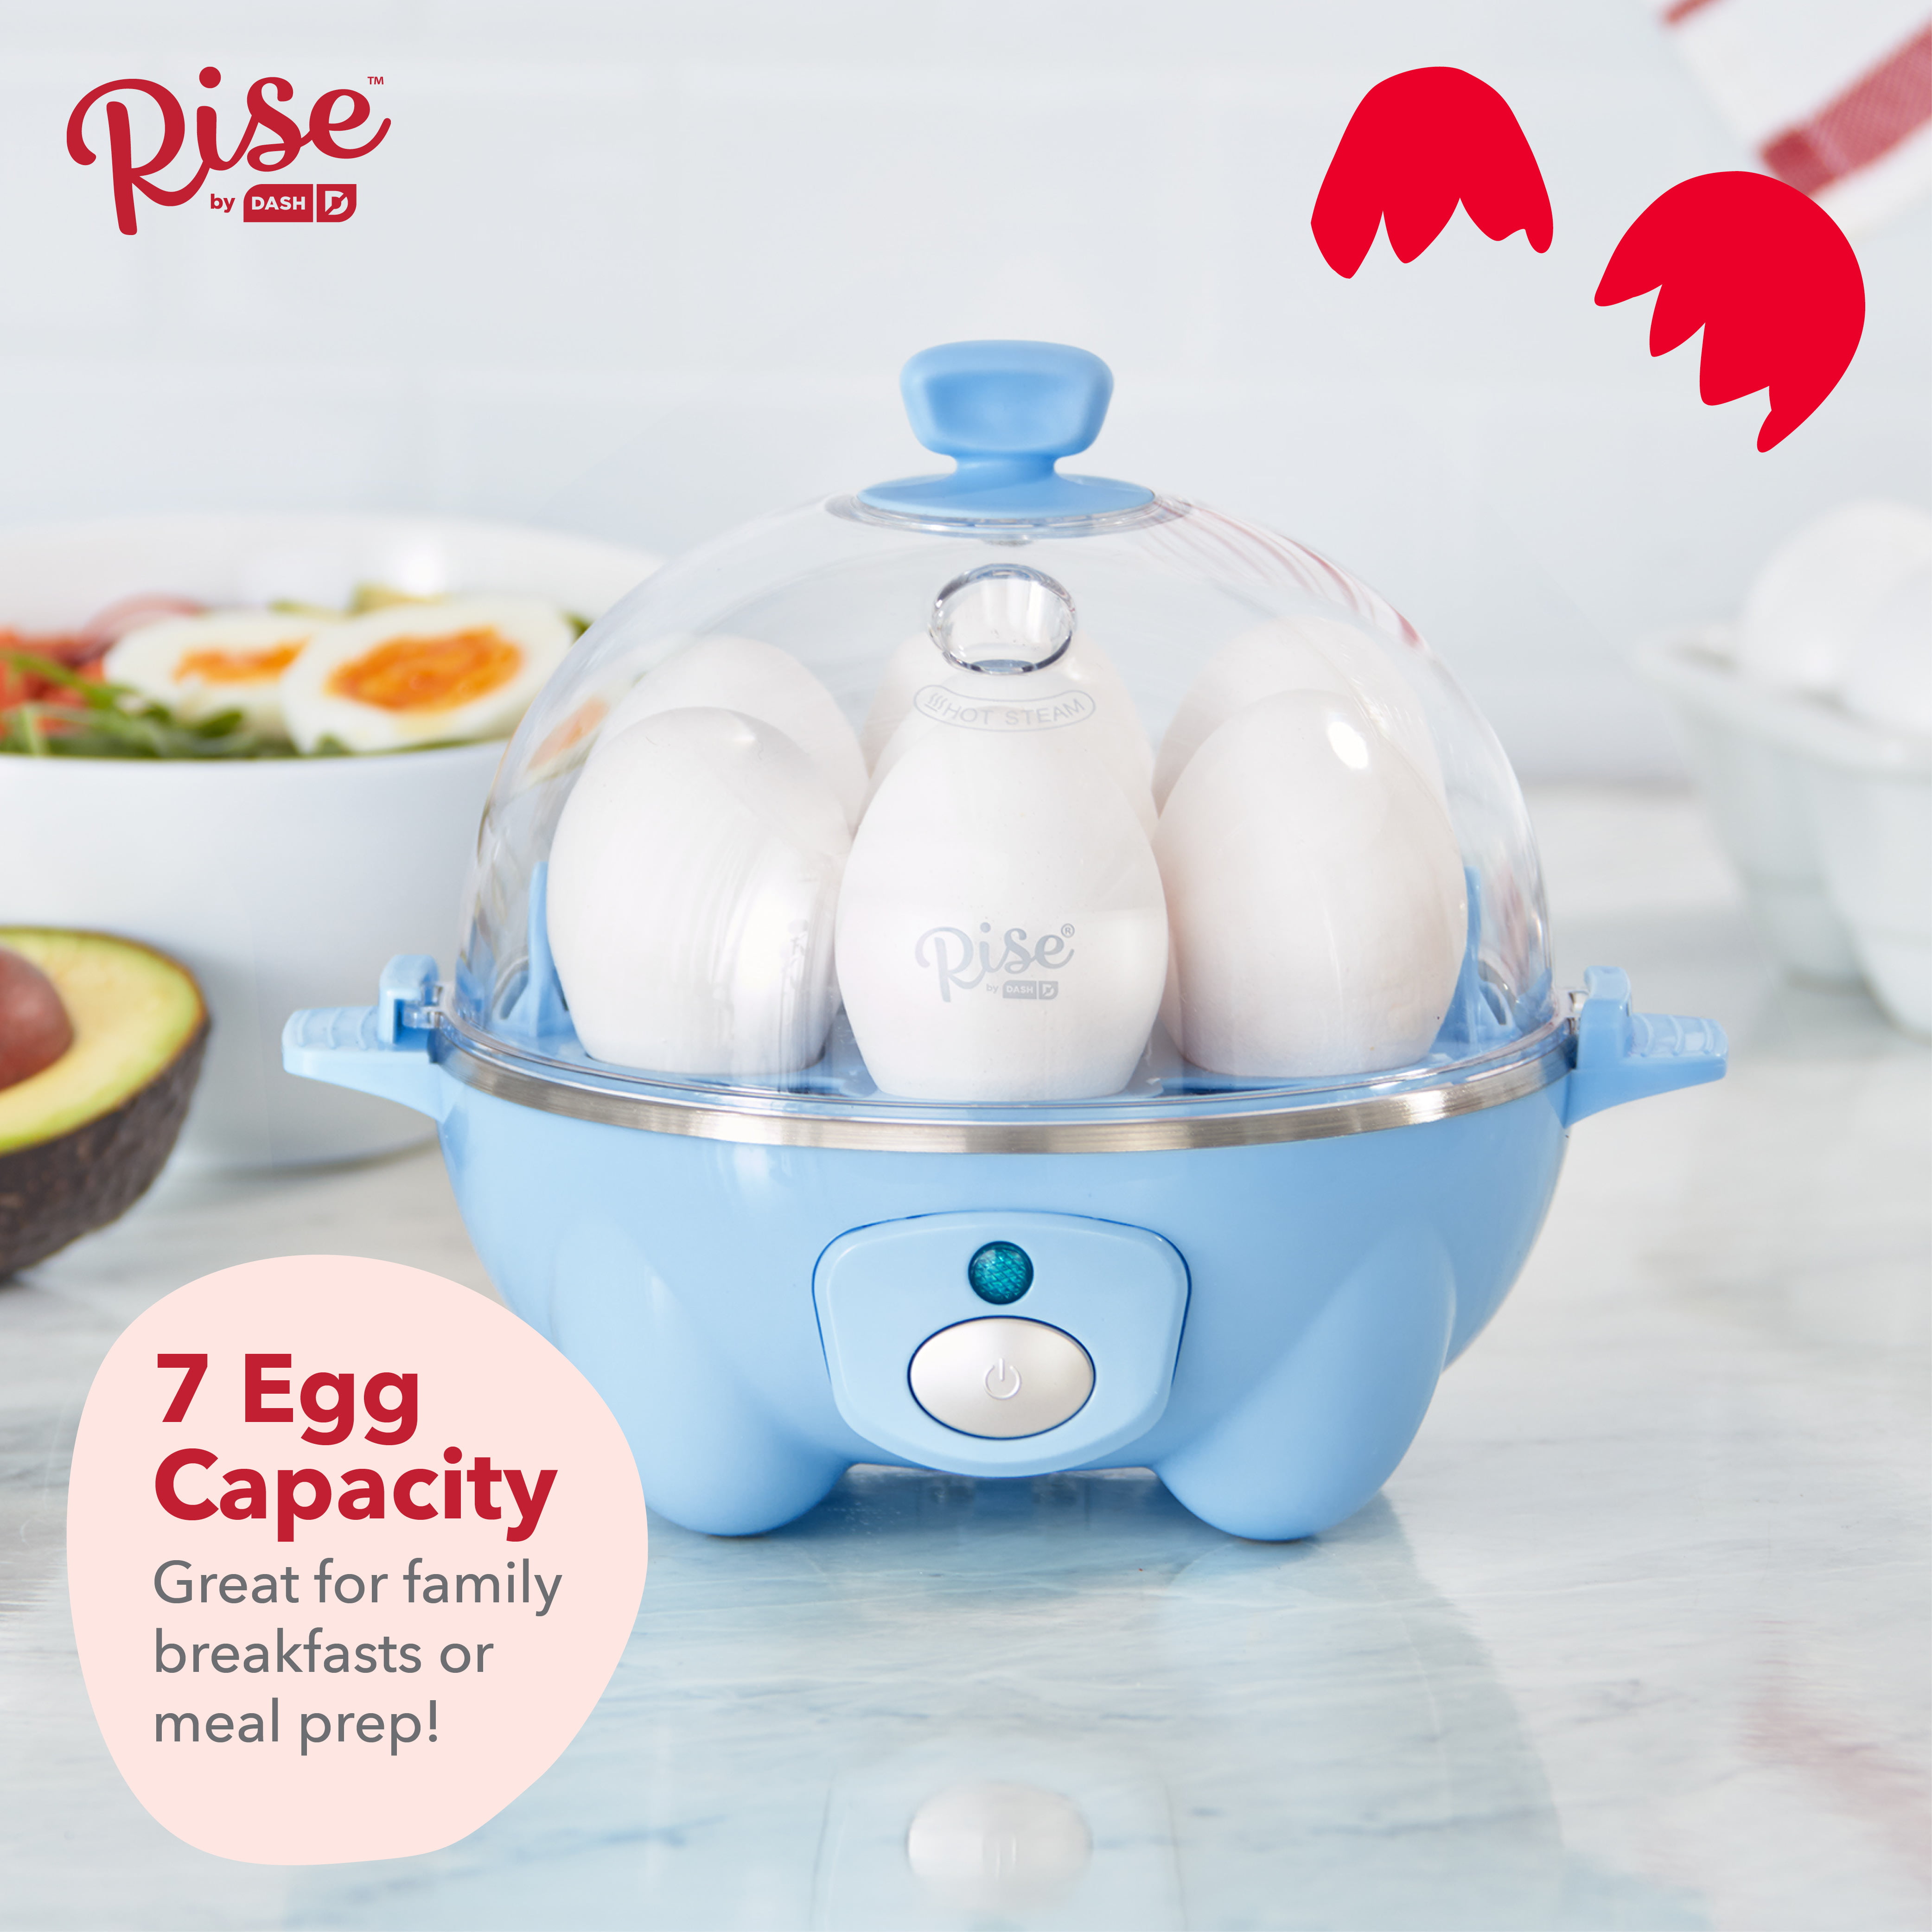 Dash Everyday Egg Cooker Make 7 Eggs Any Style!